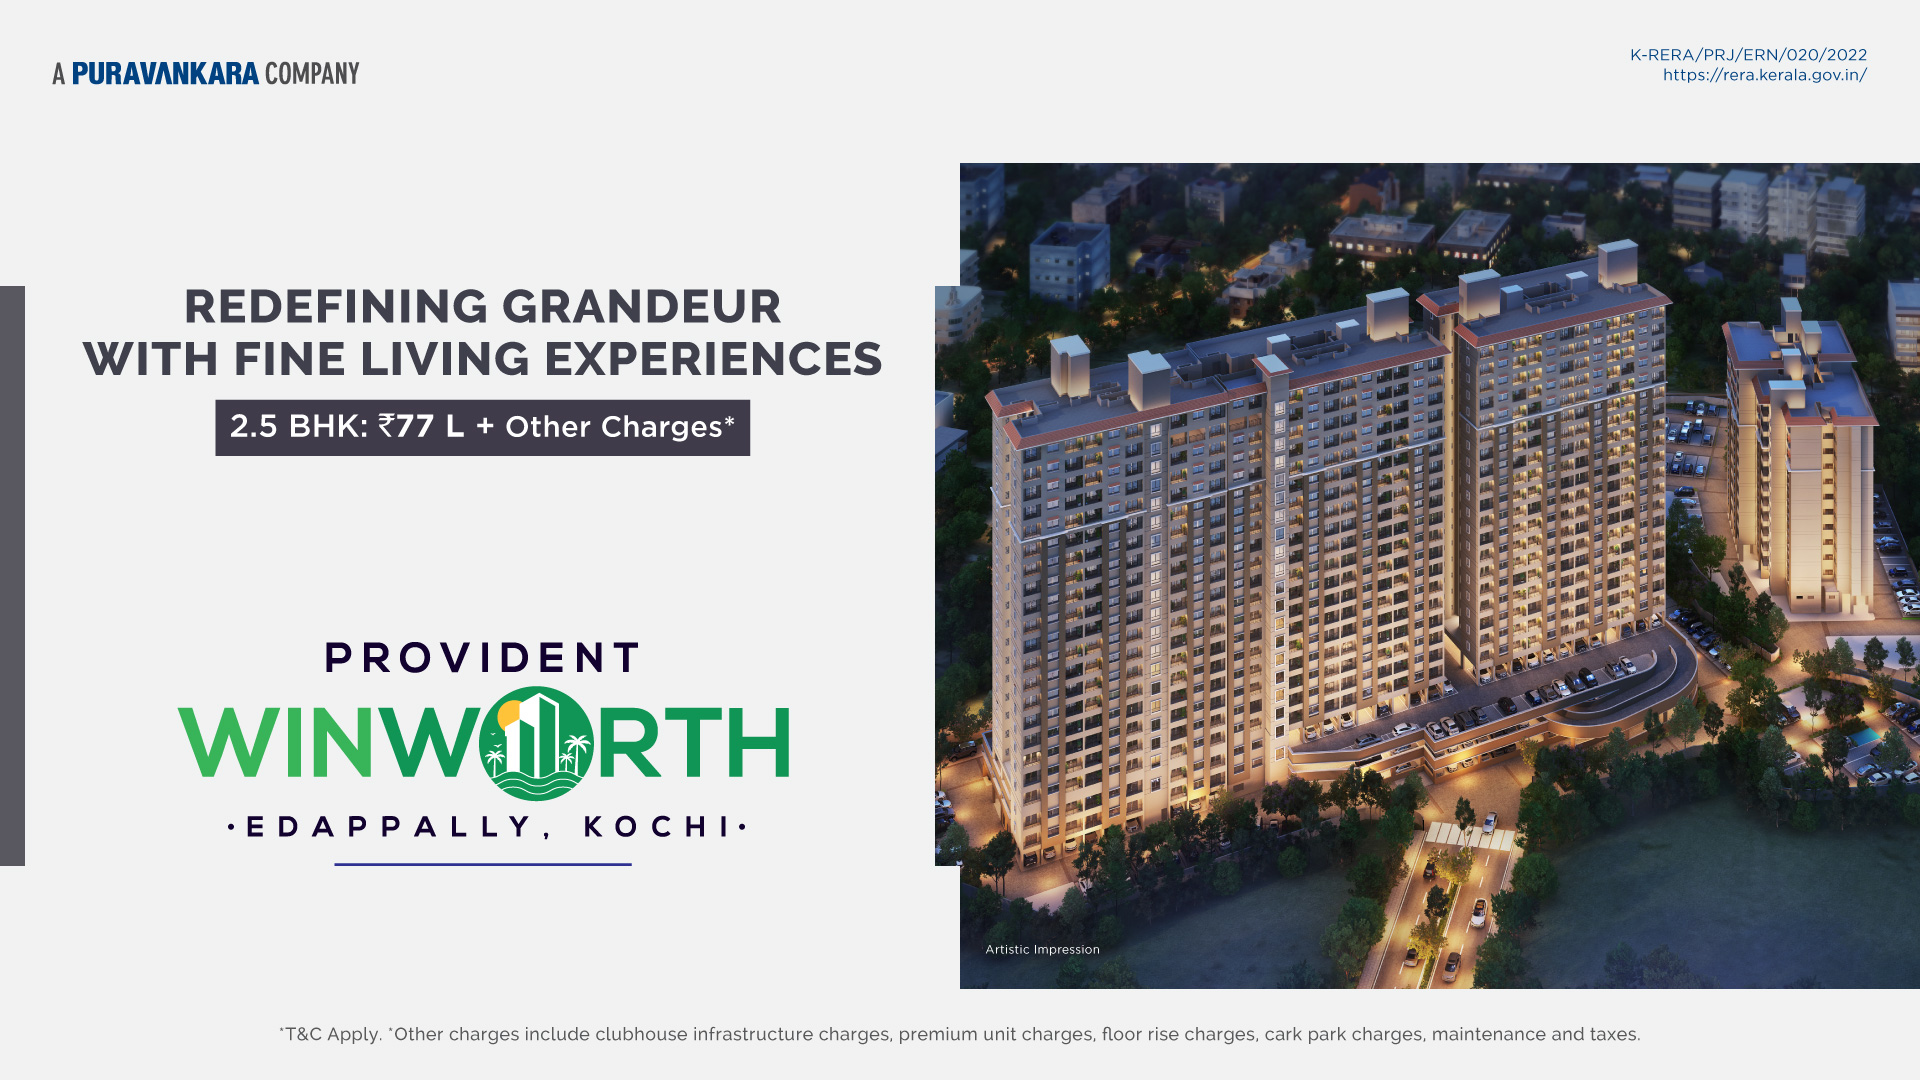 Book 2.5 BHK home Rs 77 Lac and other charges at Provident Winworth in Kochi Update